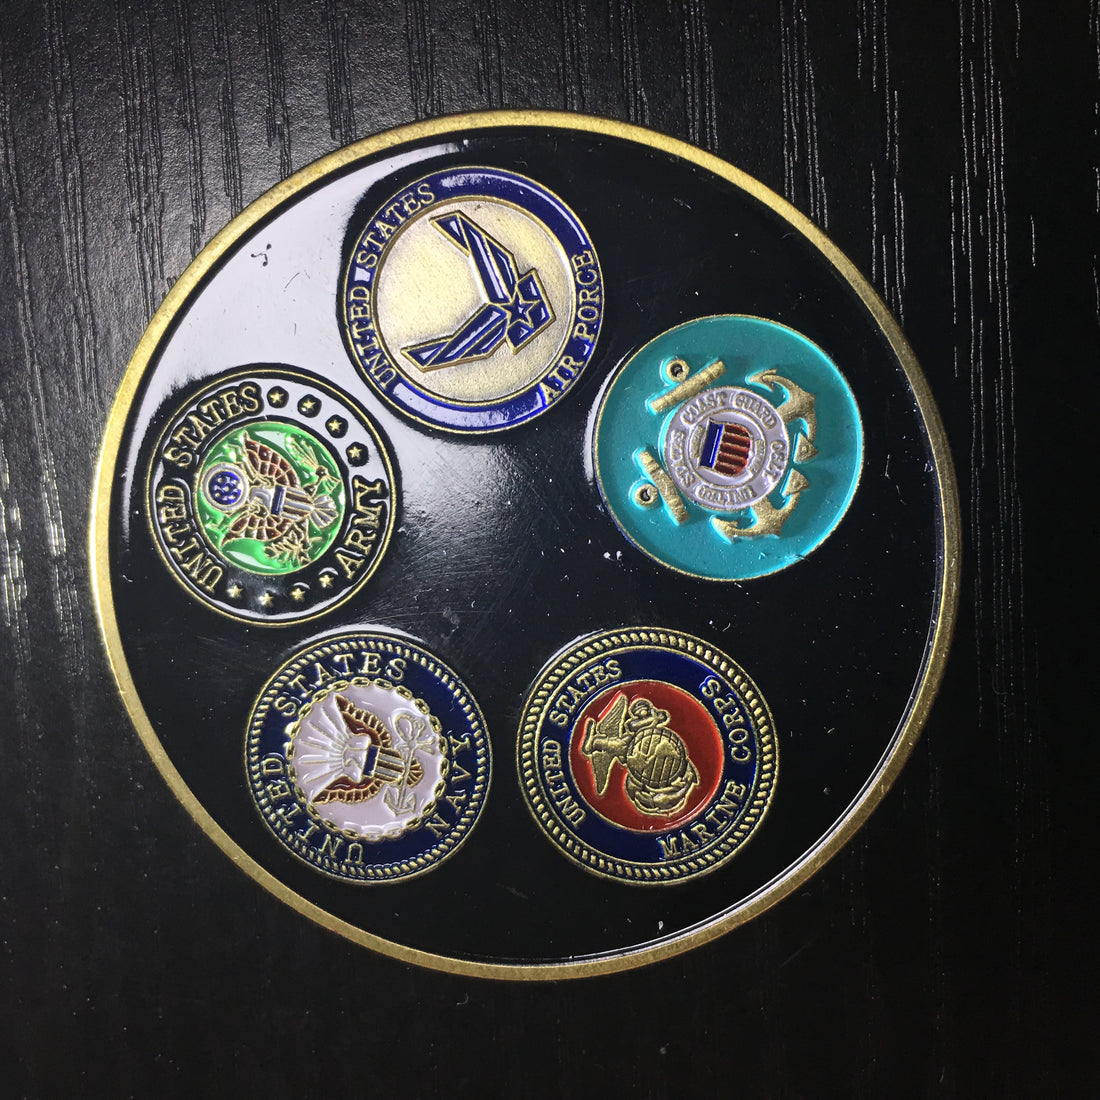 Challenge coin of Unite Stated 5 minitary